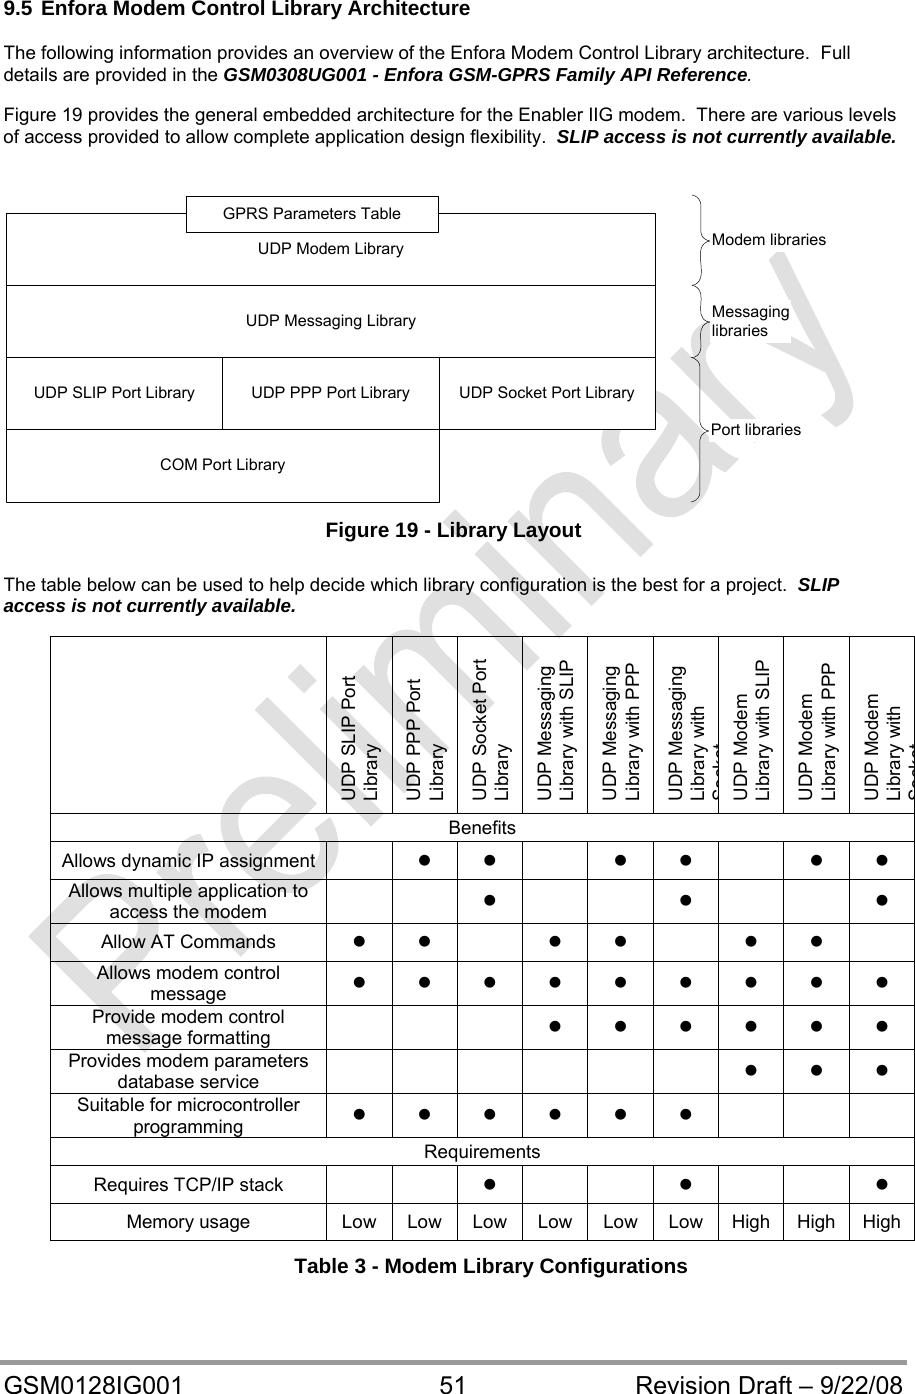  GSM0128IG001  51  Revision Draft – 9/22/08  9.5 Enfora Modem Control Library Architecture  The following information provides an overview of the Enfora Modem Control Library architecture.  Full details are provided in the GSM0308UG001 - Enfora GSM-GPRS Family API Reference.  Figure 19 provides the general embedded architecture for the Enabler IIG modem.  There are various levels of access provided to allow complete application design flexibility.  SLIP access is not currently available.  COM Port LibraryUDP SLIP Port Library UDP PPP Port Library UDP Socket Port LibraryUDP Messaging LibraryUDP Modem LibraryGPRS Parameters TablePort librariesMessaginglibrariesModem libraries Figure 19 - Library Layout  The table below can be used to help decide which library configuration is the best for a project.  SLIP access is not currently available.   UDP SLIP Port Library UDP PPP Port Library UDP Socket Port Library UDP Messaging Library with SLIP UDP Messaging Library with PPP UDP Messaging Library with SocketUDP Modem Library with SLIP UDP Modem Library with PPP UDP Modem Library with SocketBenefits Allows dynamic IP assignment            Allows multiple application to access the modem           Allow AT Commands           Allows modem control message           Provide modem control message formatting           Provides modem parameters database service           Suitable for microcontroller programming           Requirements Requires TCP/IP stack             Memory usage  Low Low Low Low Low Low High High High Table 3 - Modem Library Configurations  